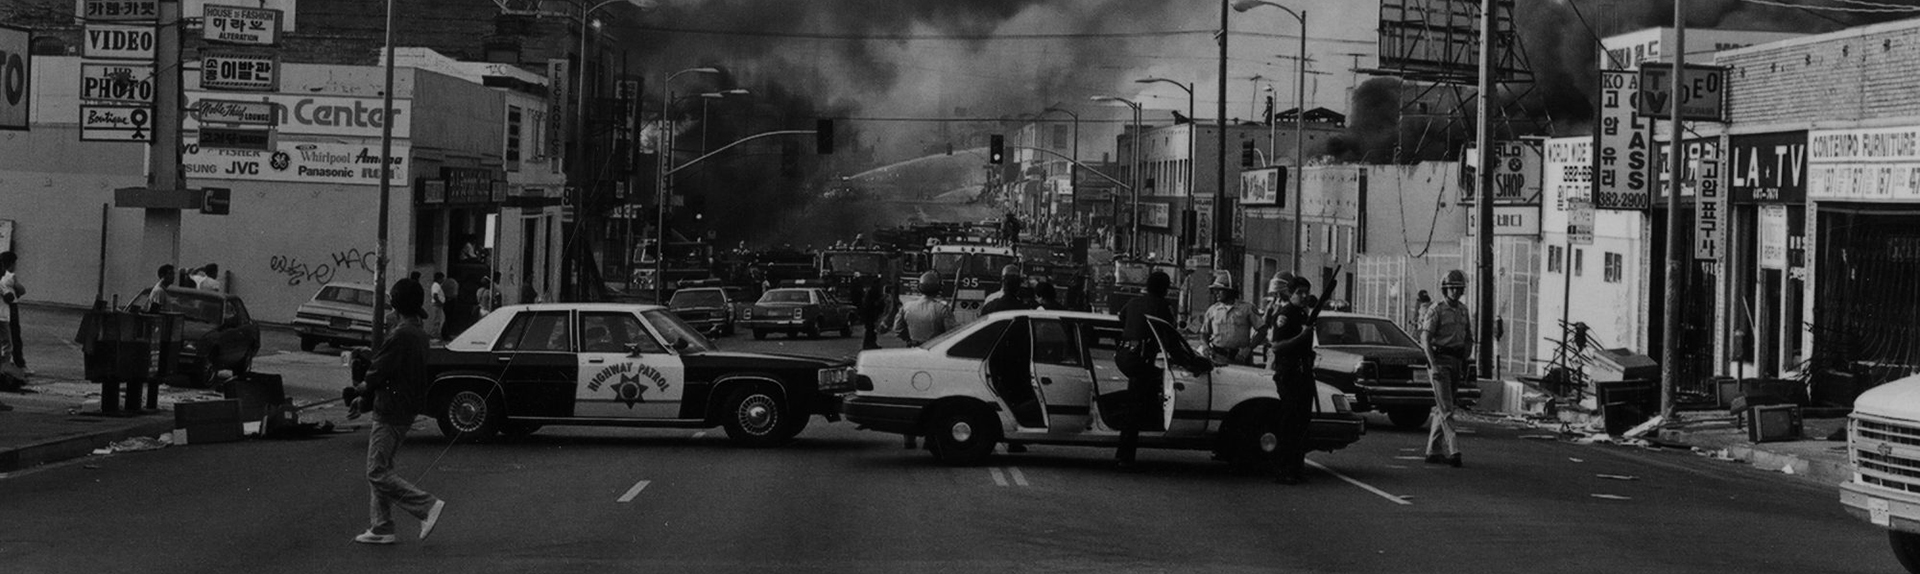 THE HISTORY OF RIOTS